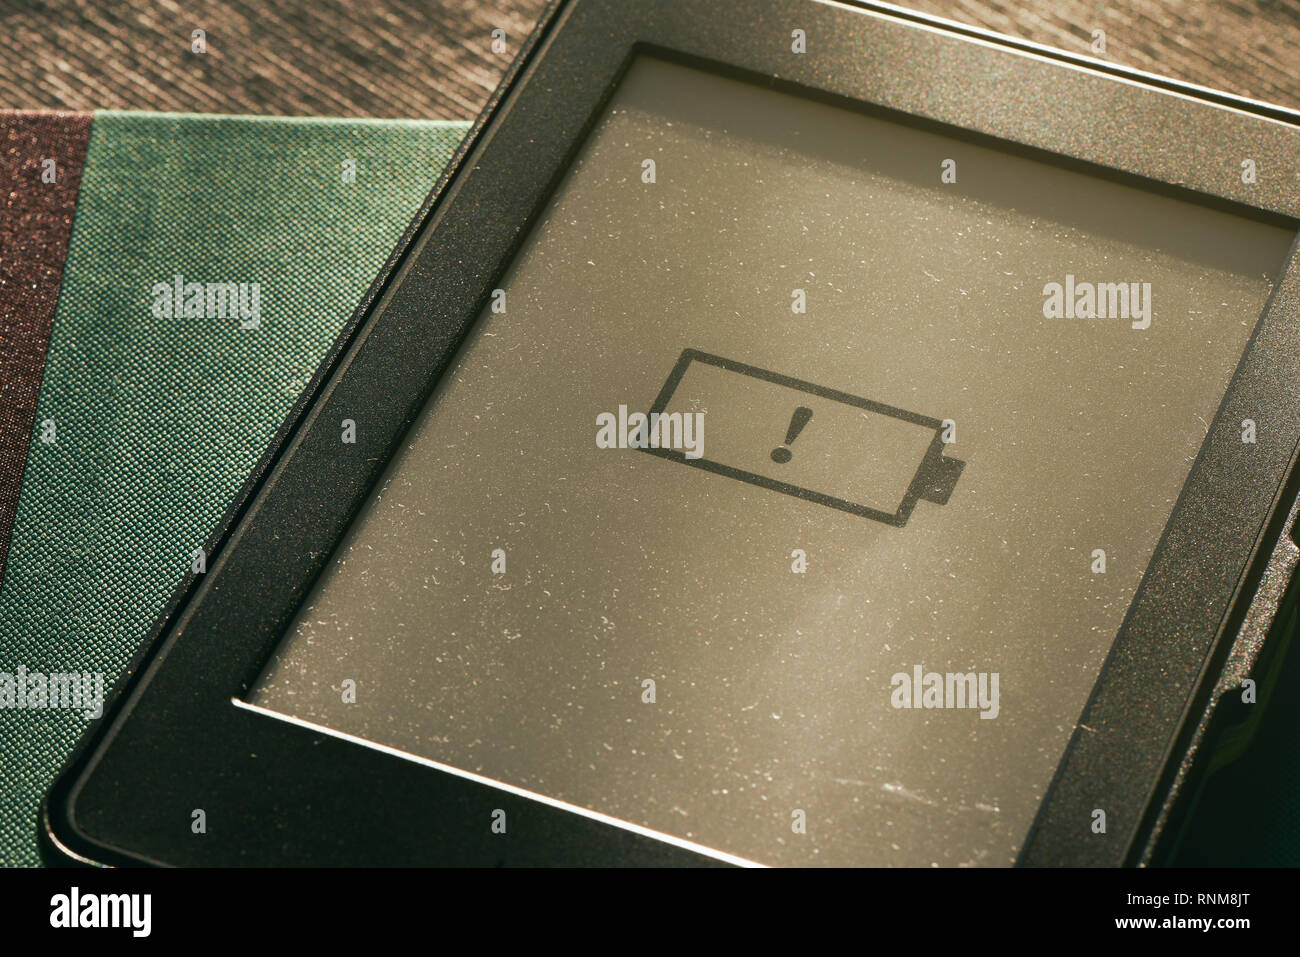 low battery icon on e-book e-reader screen with warm sunlight Stock Photo